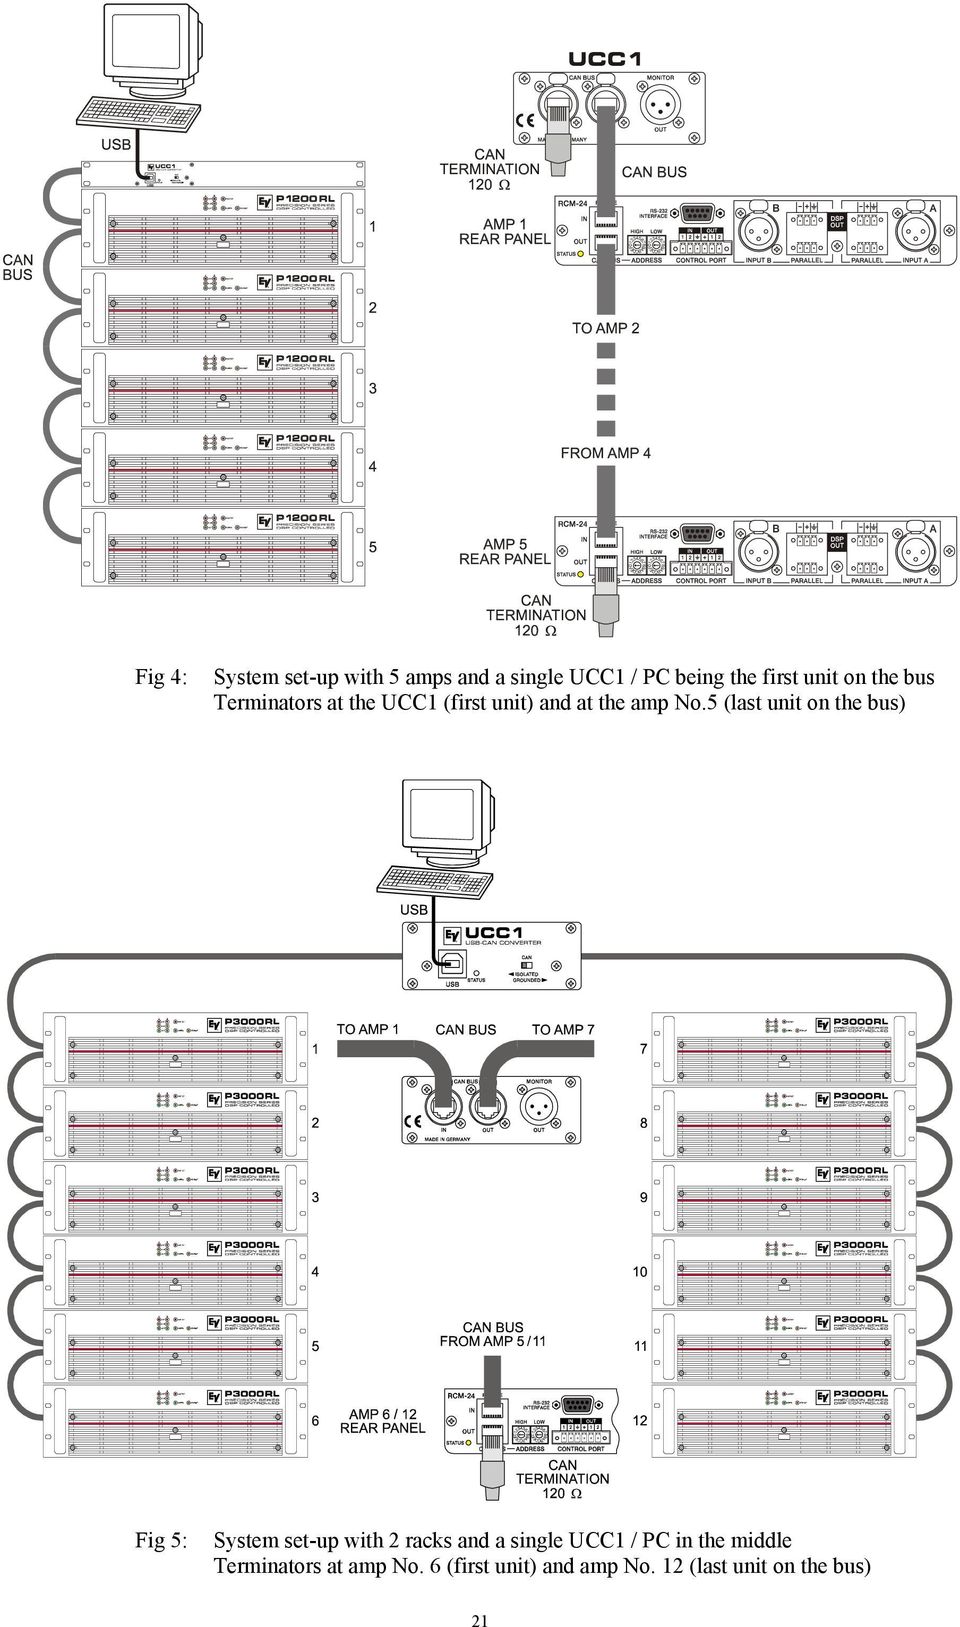 5 (last unit on the bus) Fig 5: System set-up with 2 racks and a single UCC1 /